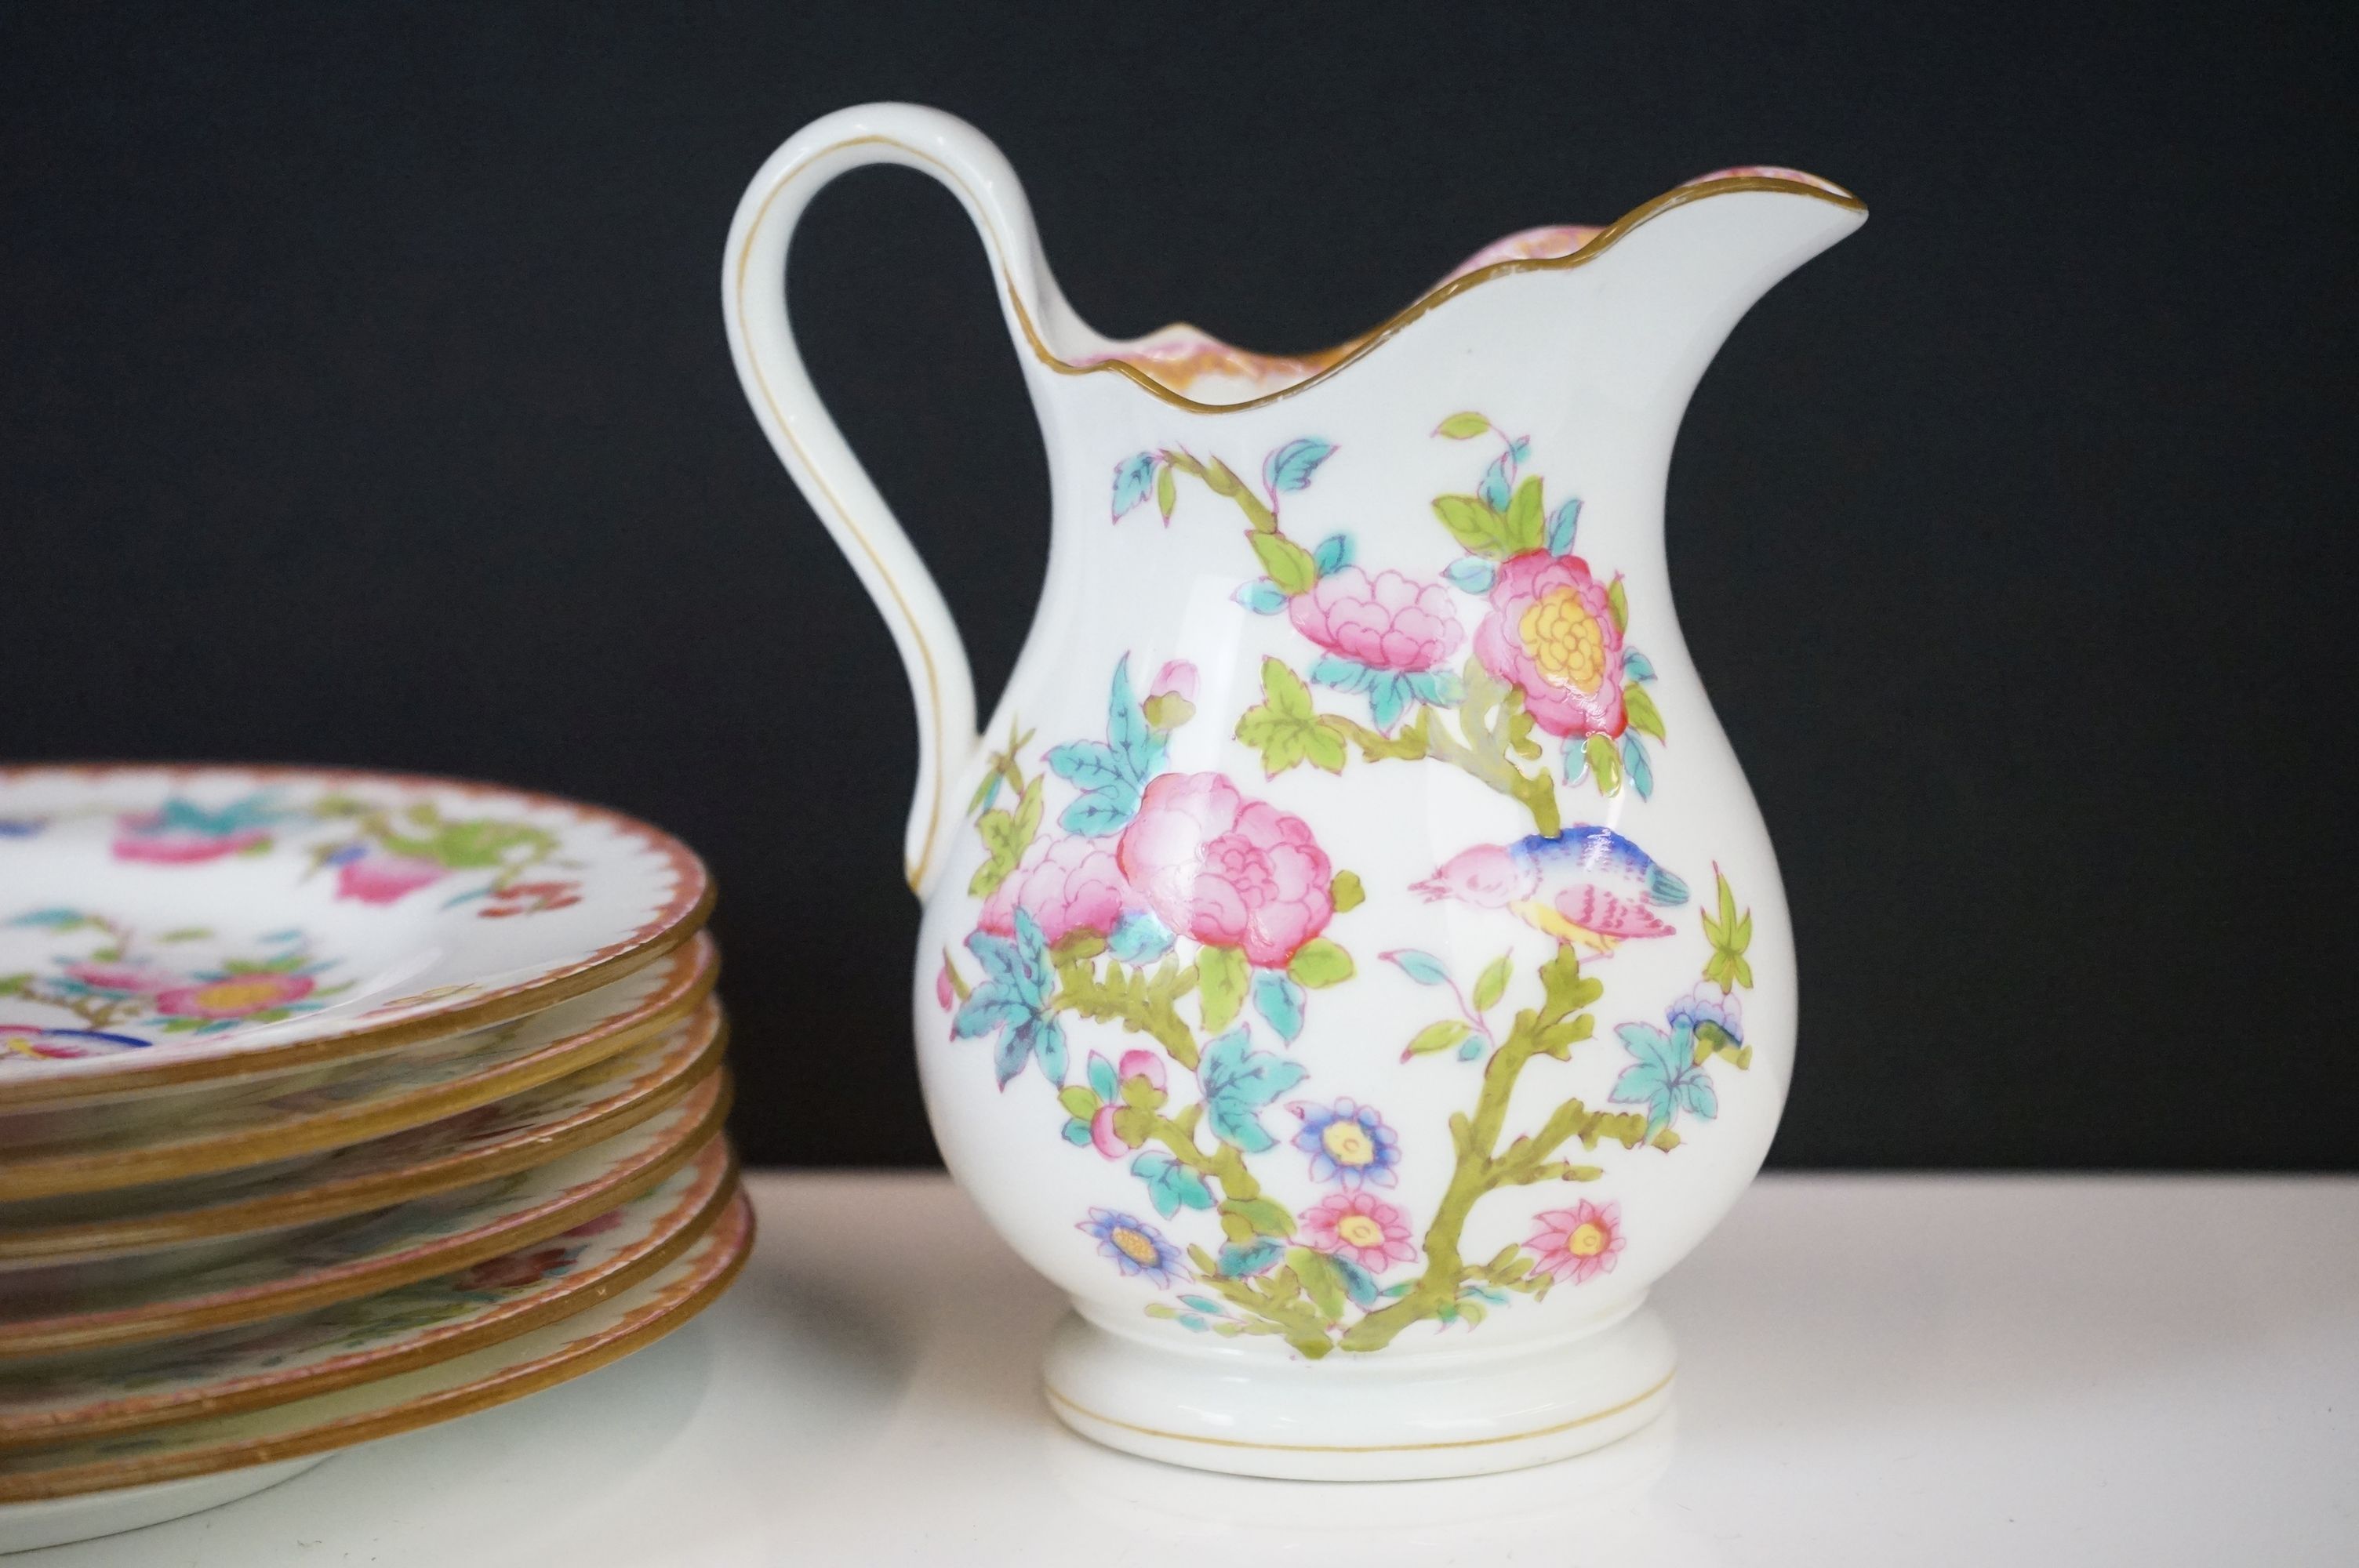 Mintons porcelain tea service decorated with songbirds amongst peonies, to include 6 teacups & - Image 7 of 8